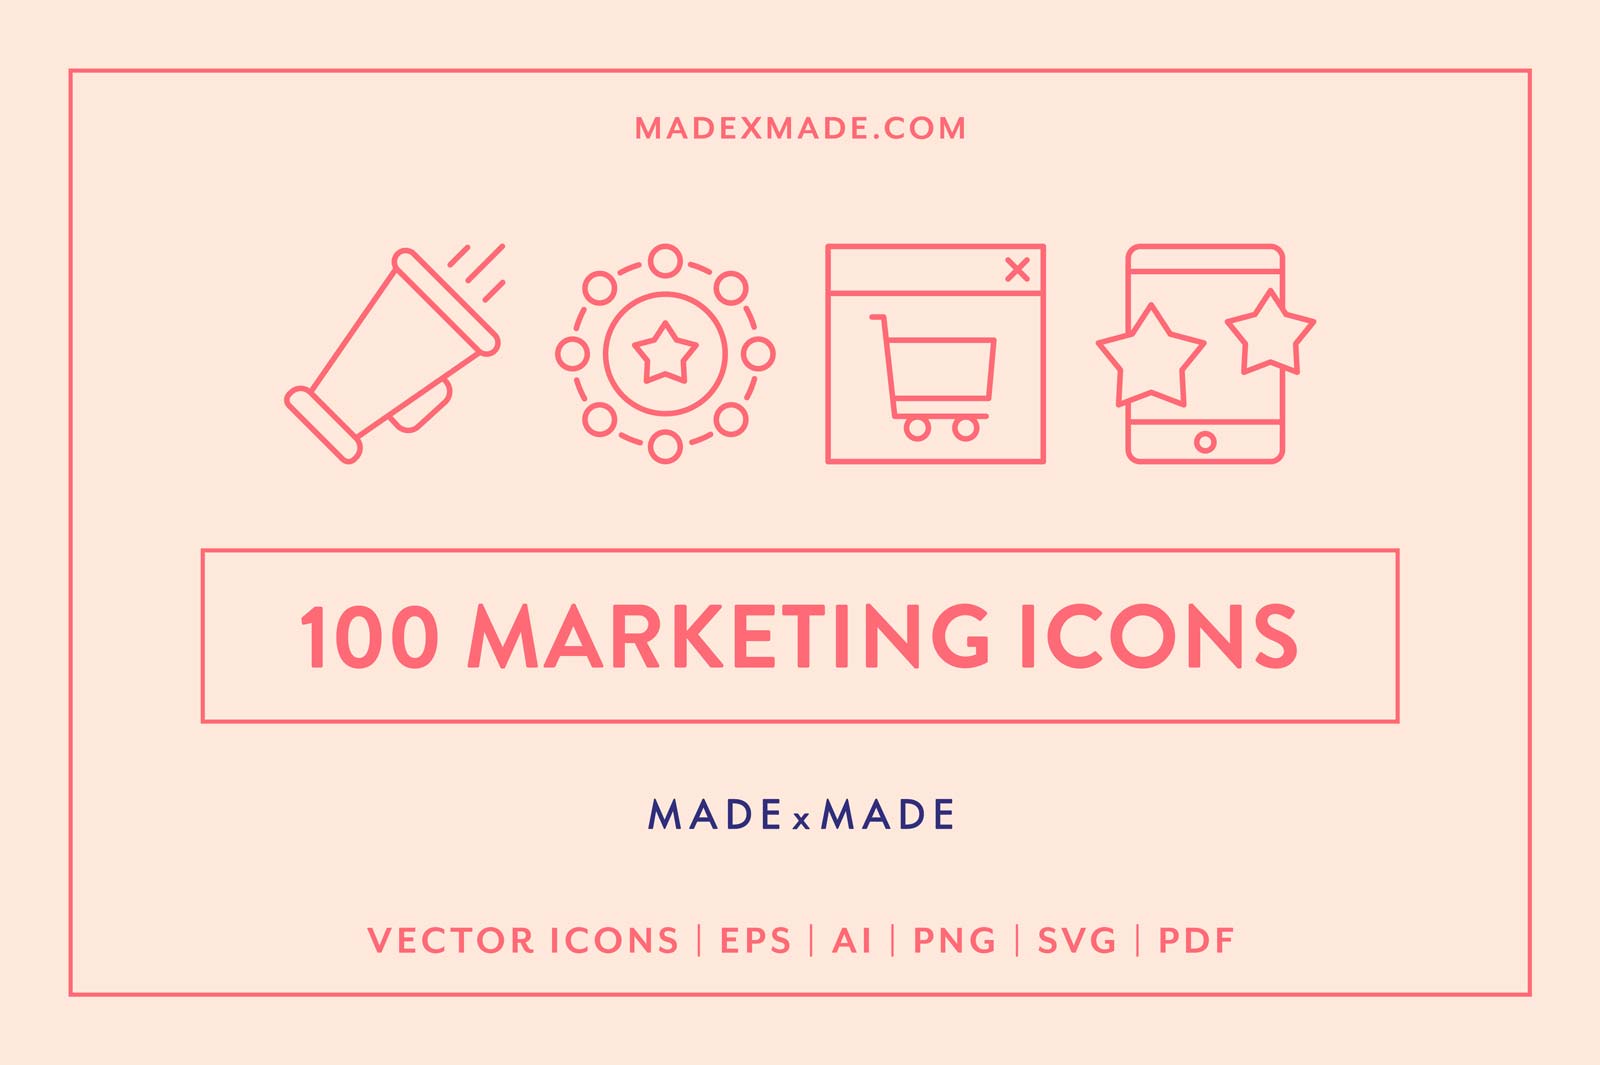 made x made icons marketing cover – consistent icons for business, advertising, commerce, media, communications, SEO, strategy